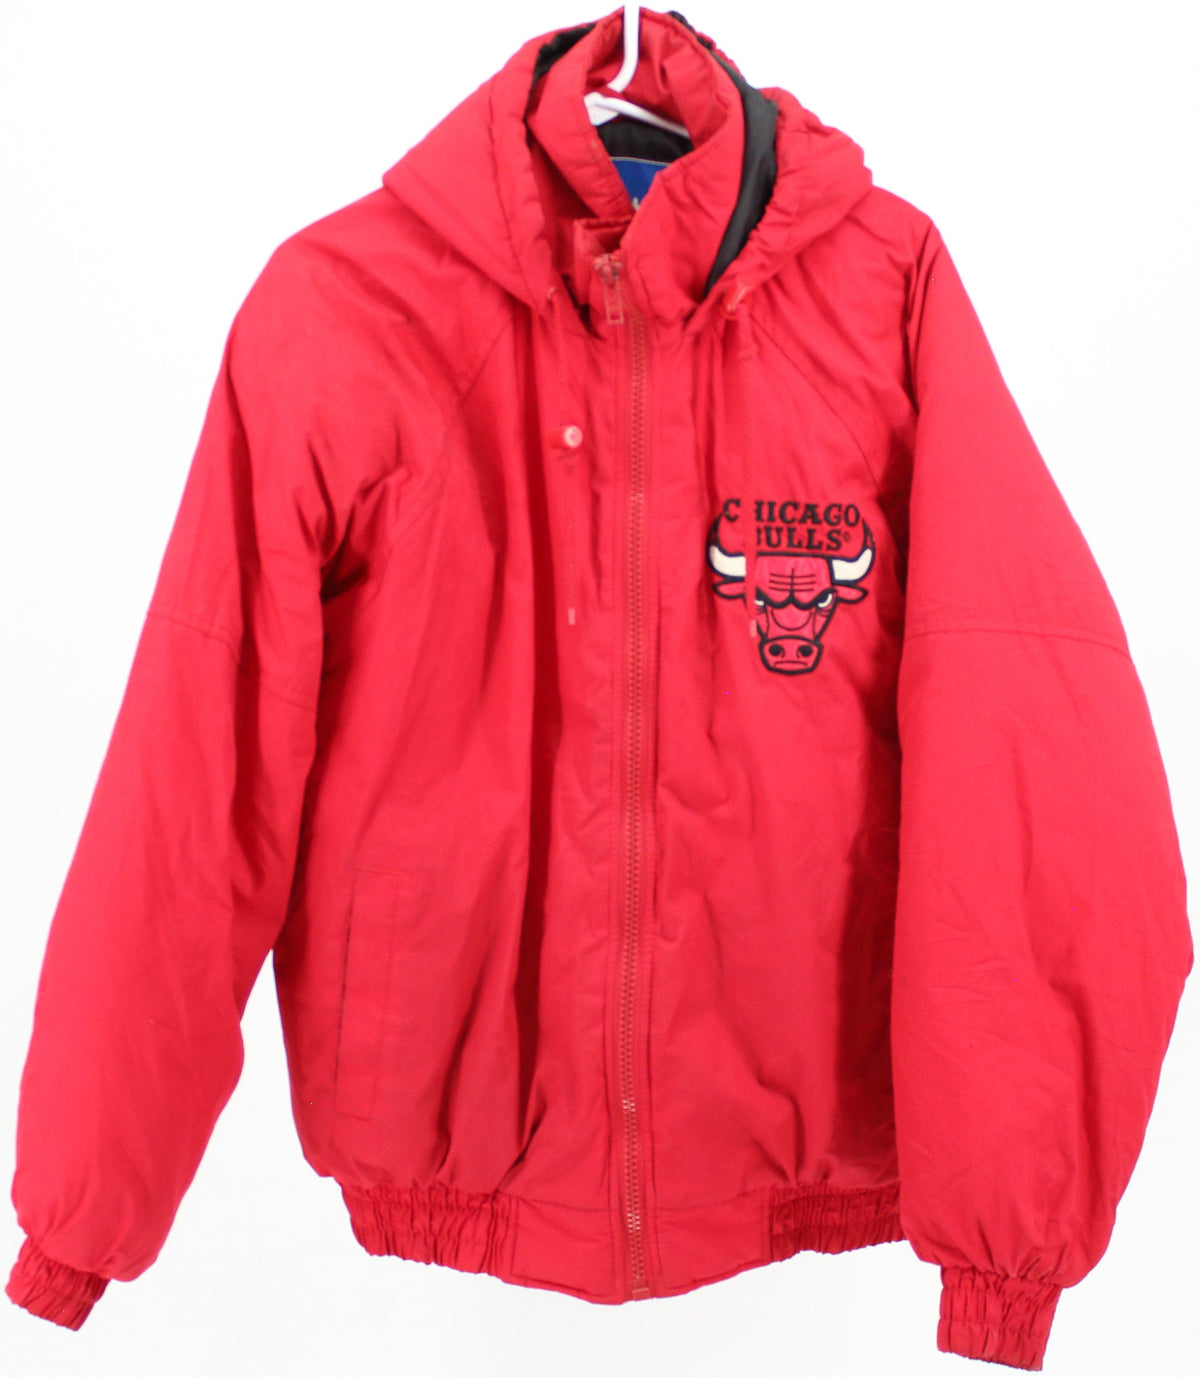 Fans Gear Chicago Bulls Red Hooded Jacket